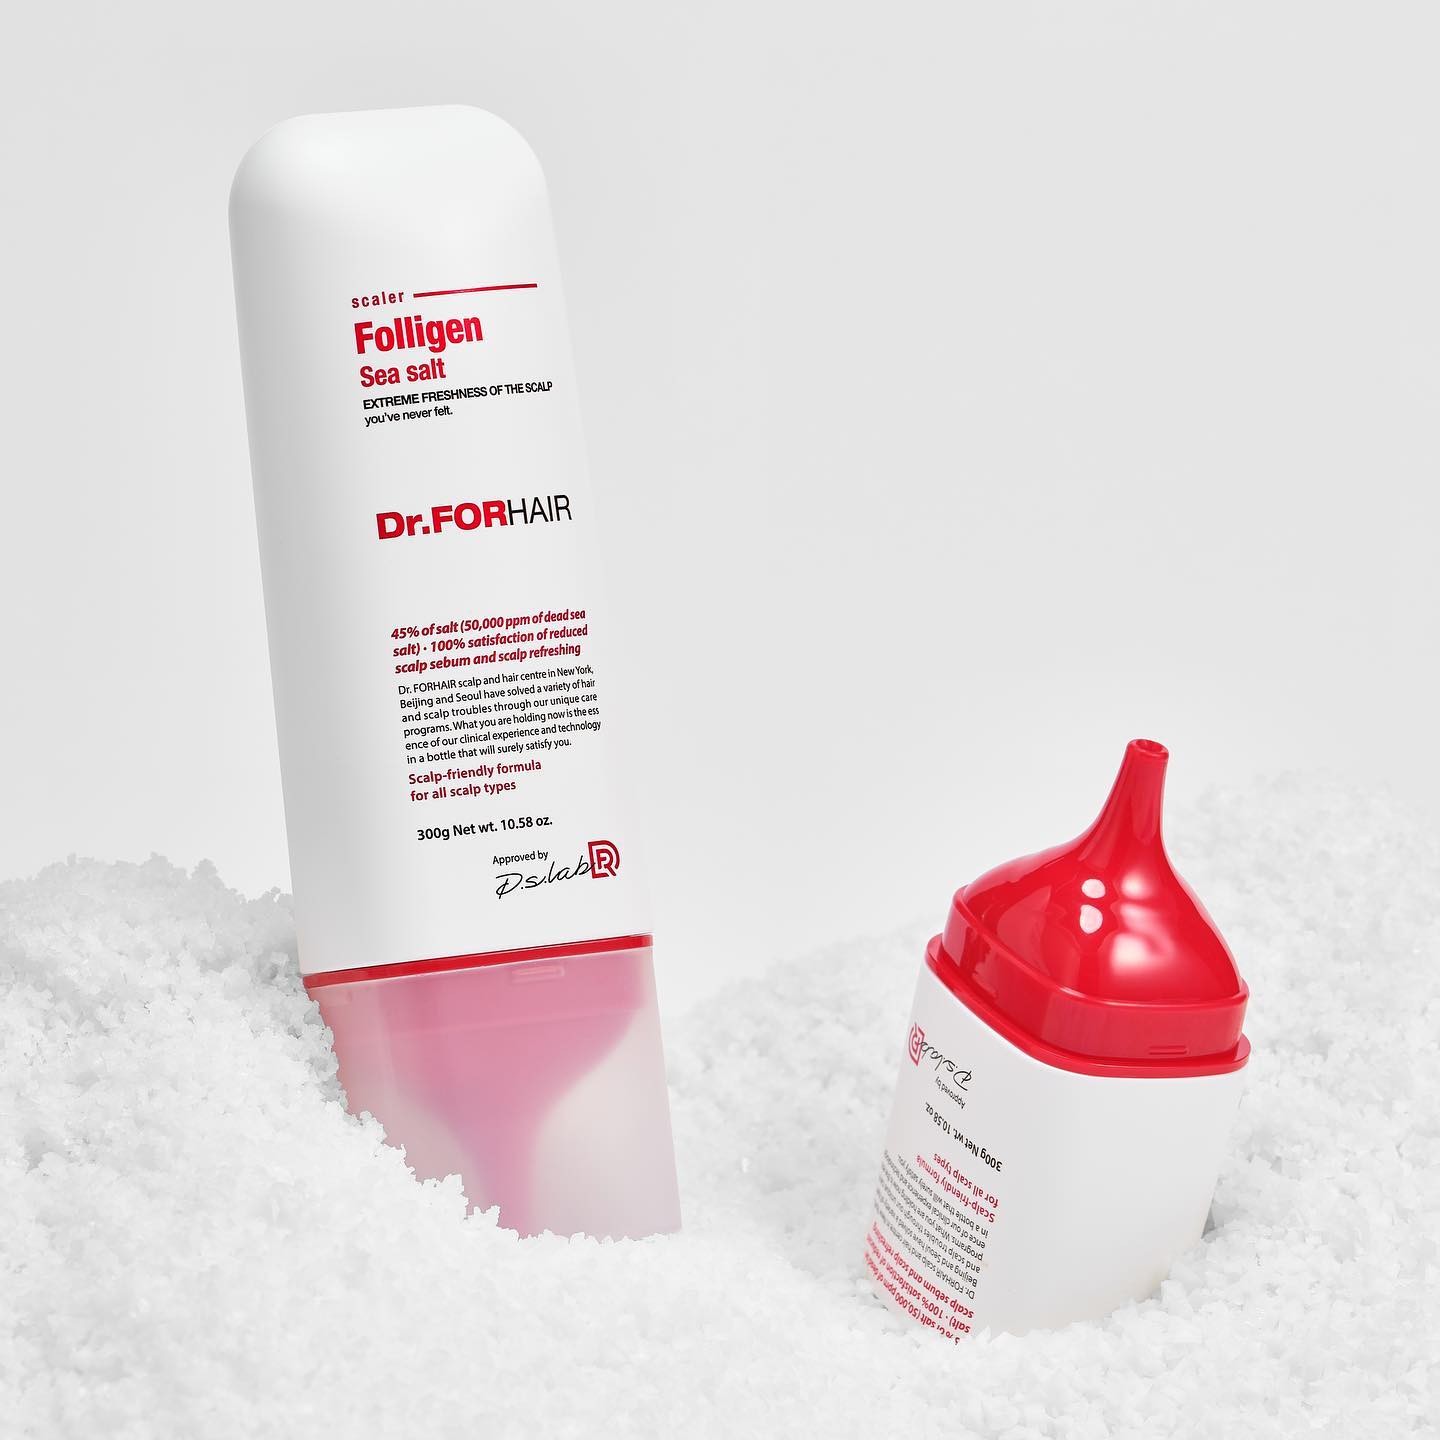 Scalp peeling with dead sea salt particles by Dr.Forhair (Dr.Forhair Folligen Sea Salt Scaler)